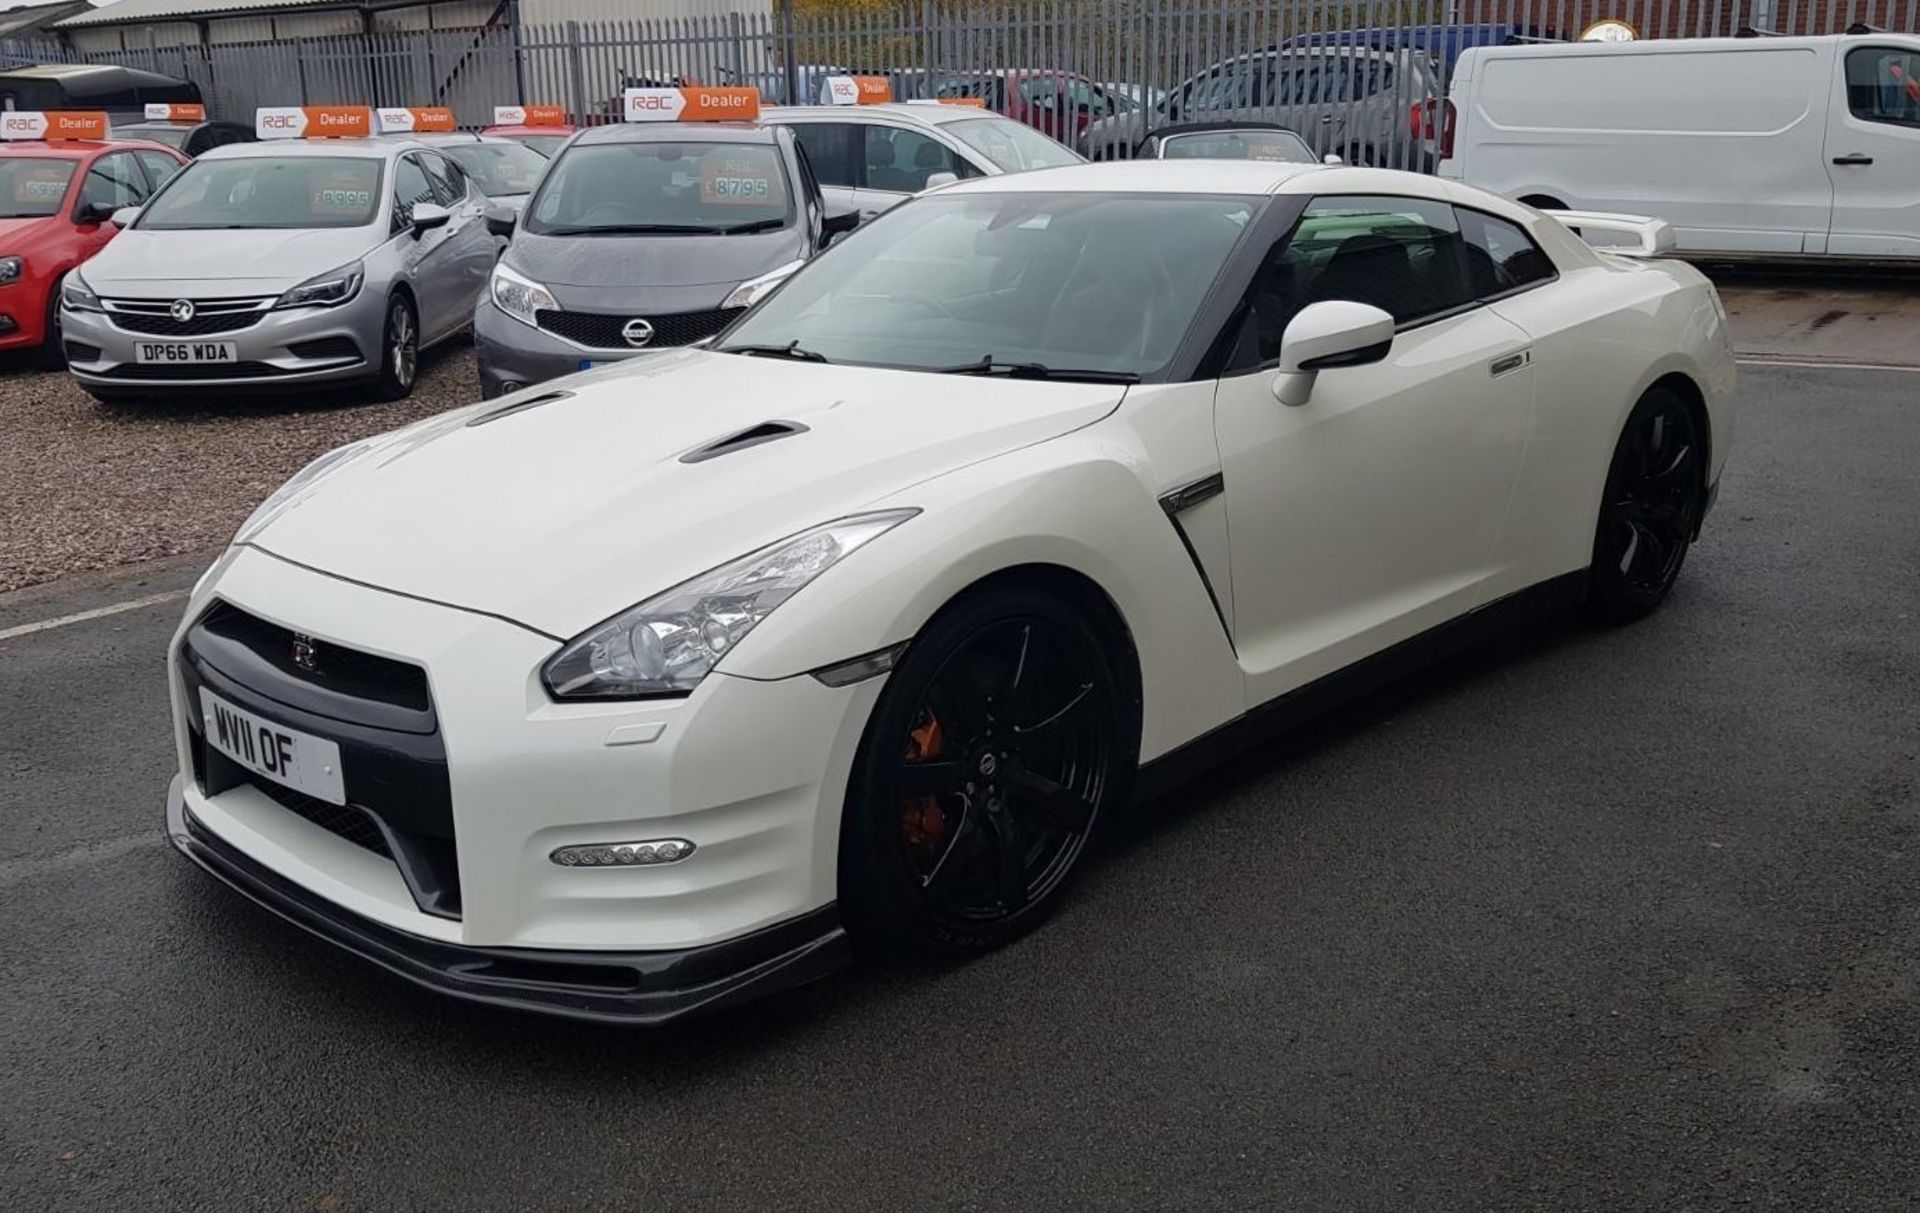 2011 NISSAN GT-R R35 750 stage 5 PREMIUM EDITION S-A 1 OWNER FROM NEW 20K MILES WARRANTED! - Image 3 of 7